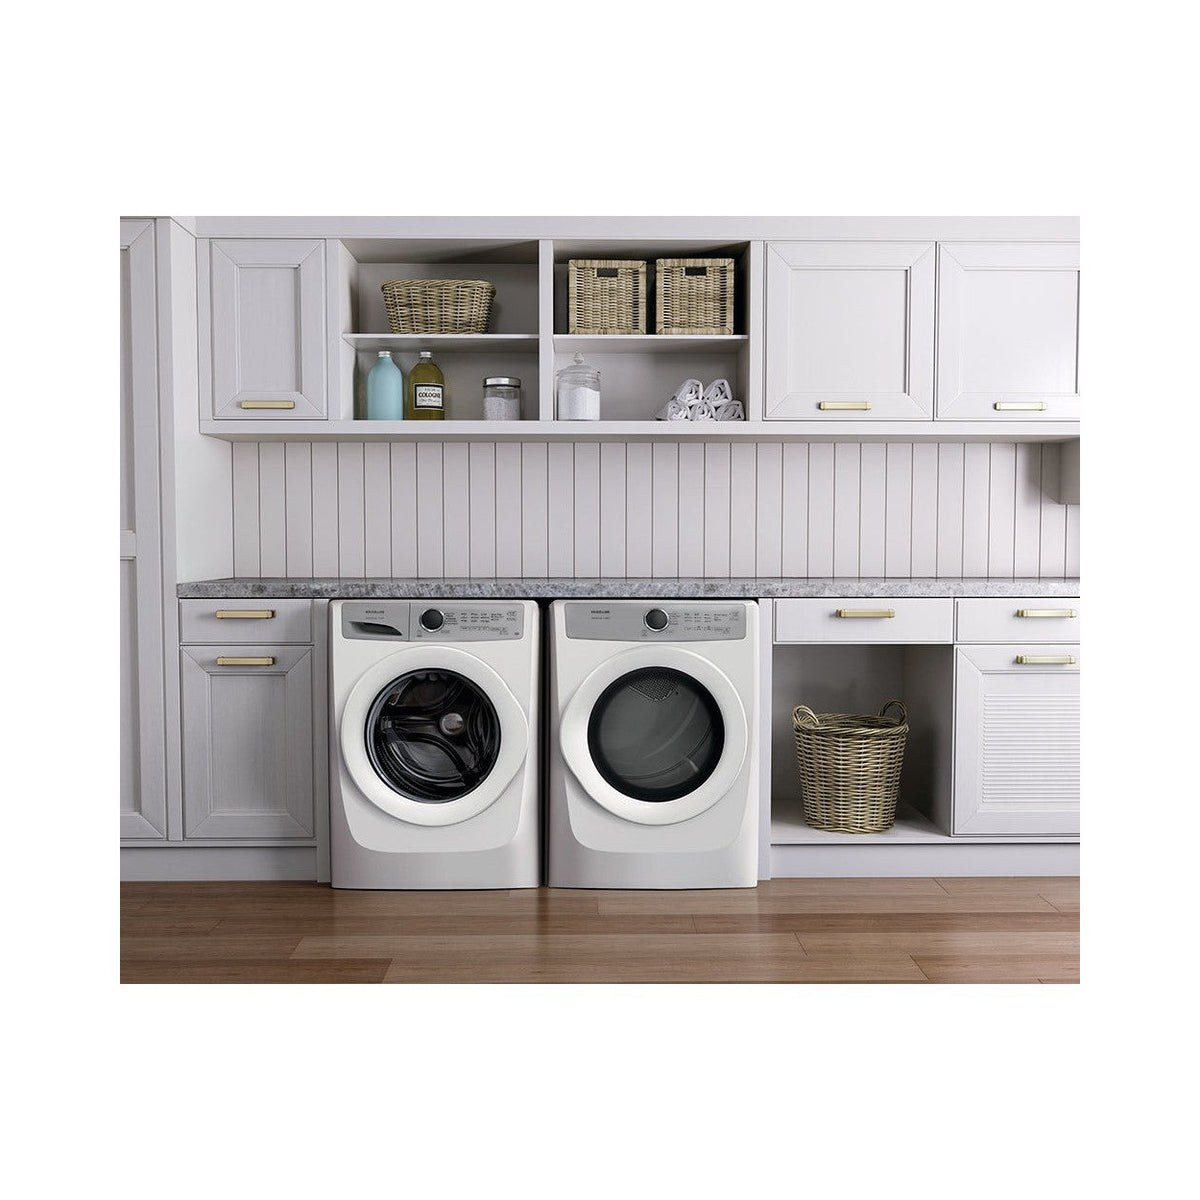 FRIGIDAIRE FWFX22D4EW Front Load Washer 4.3 Cu Ft